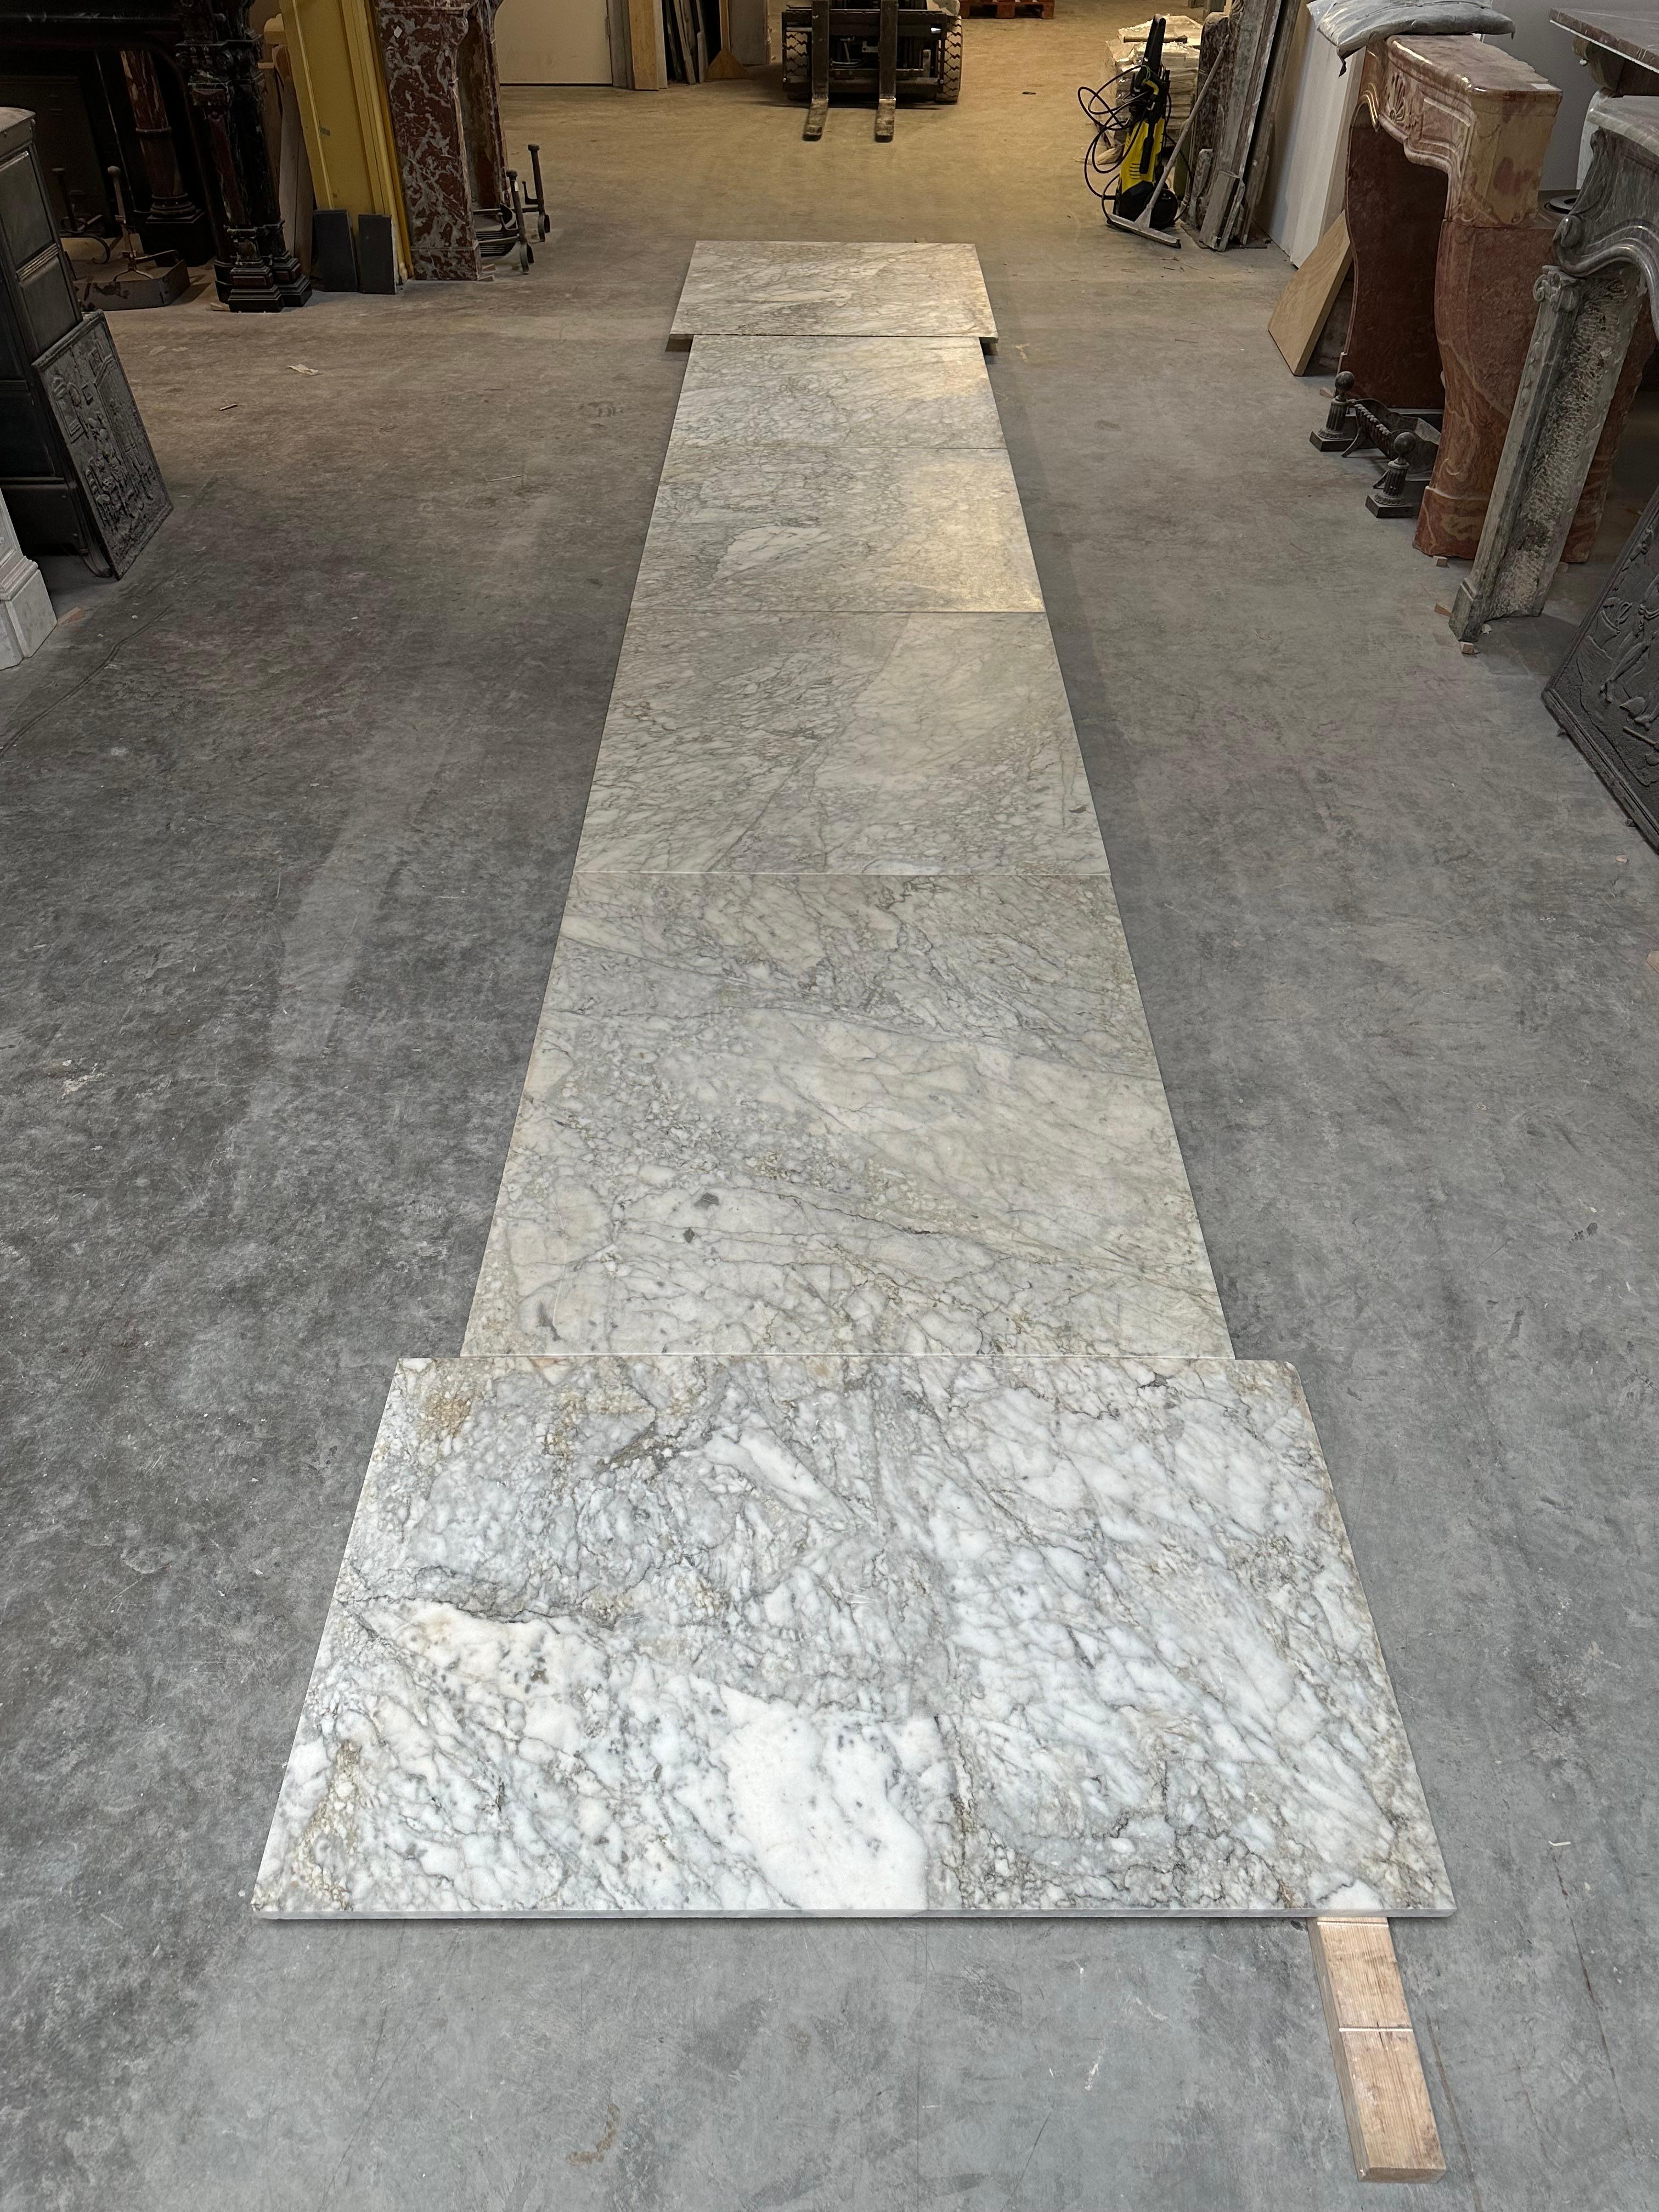 Very please to offer this beautiful Arabescato marble floor.
This used to be the hallway in a late 19th century hallway in the city center of Utrecht. The floor dates back to approx. 1870.

This Arabescato marble has a beautiful white font with